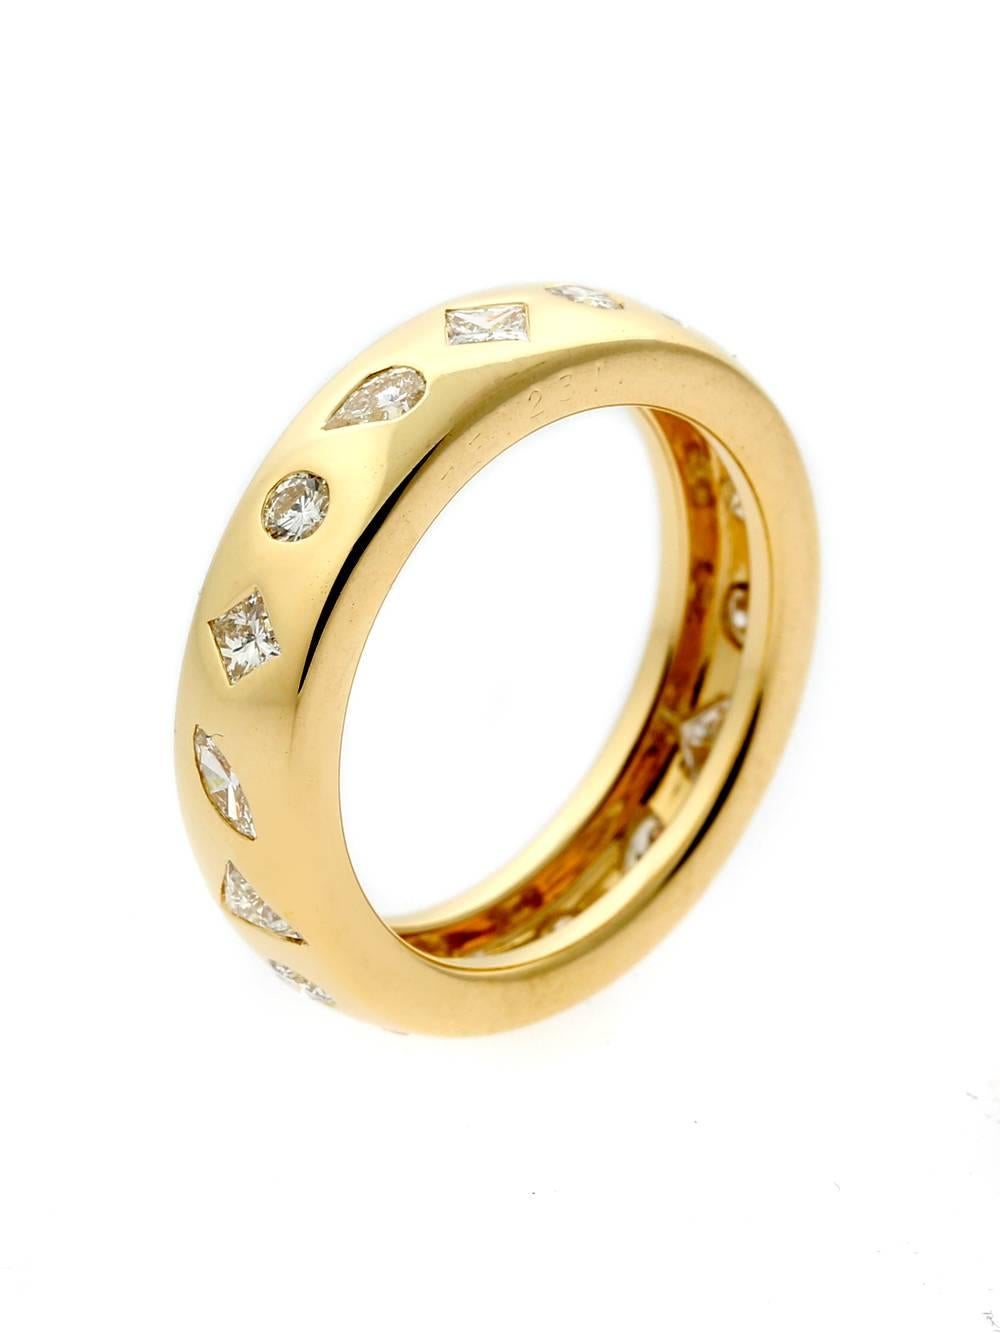 A magnificent Chanel diamond eternity ring featuring round brilliant, princess, pear and trillion cut diamonds set in 18k yellow gold.

1.50ct appx, Size 7 1/2

Inventory ID: 0000374